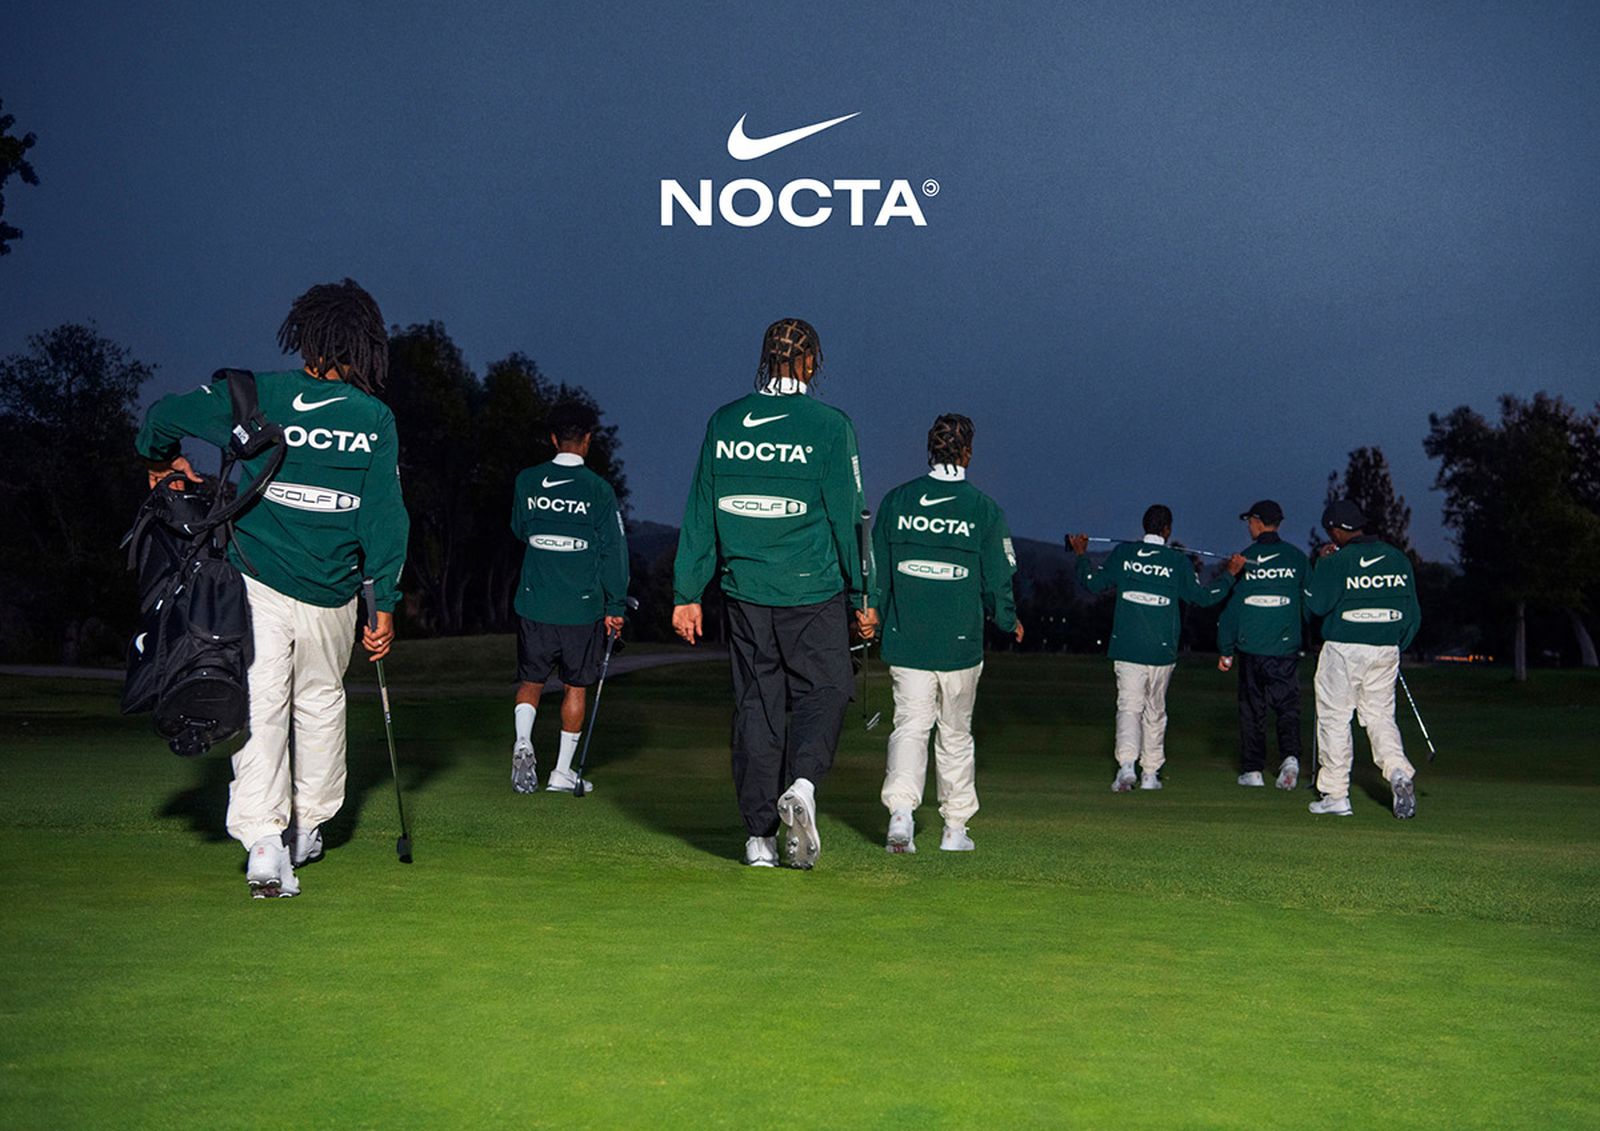 drake-nike-nocta-golf-collection-release-info-08